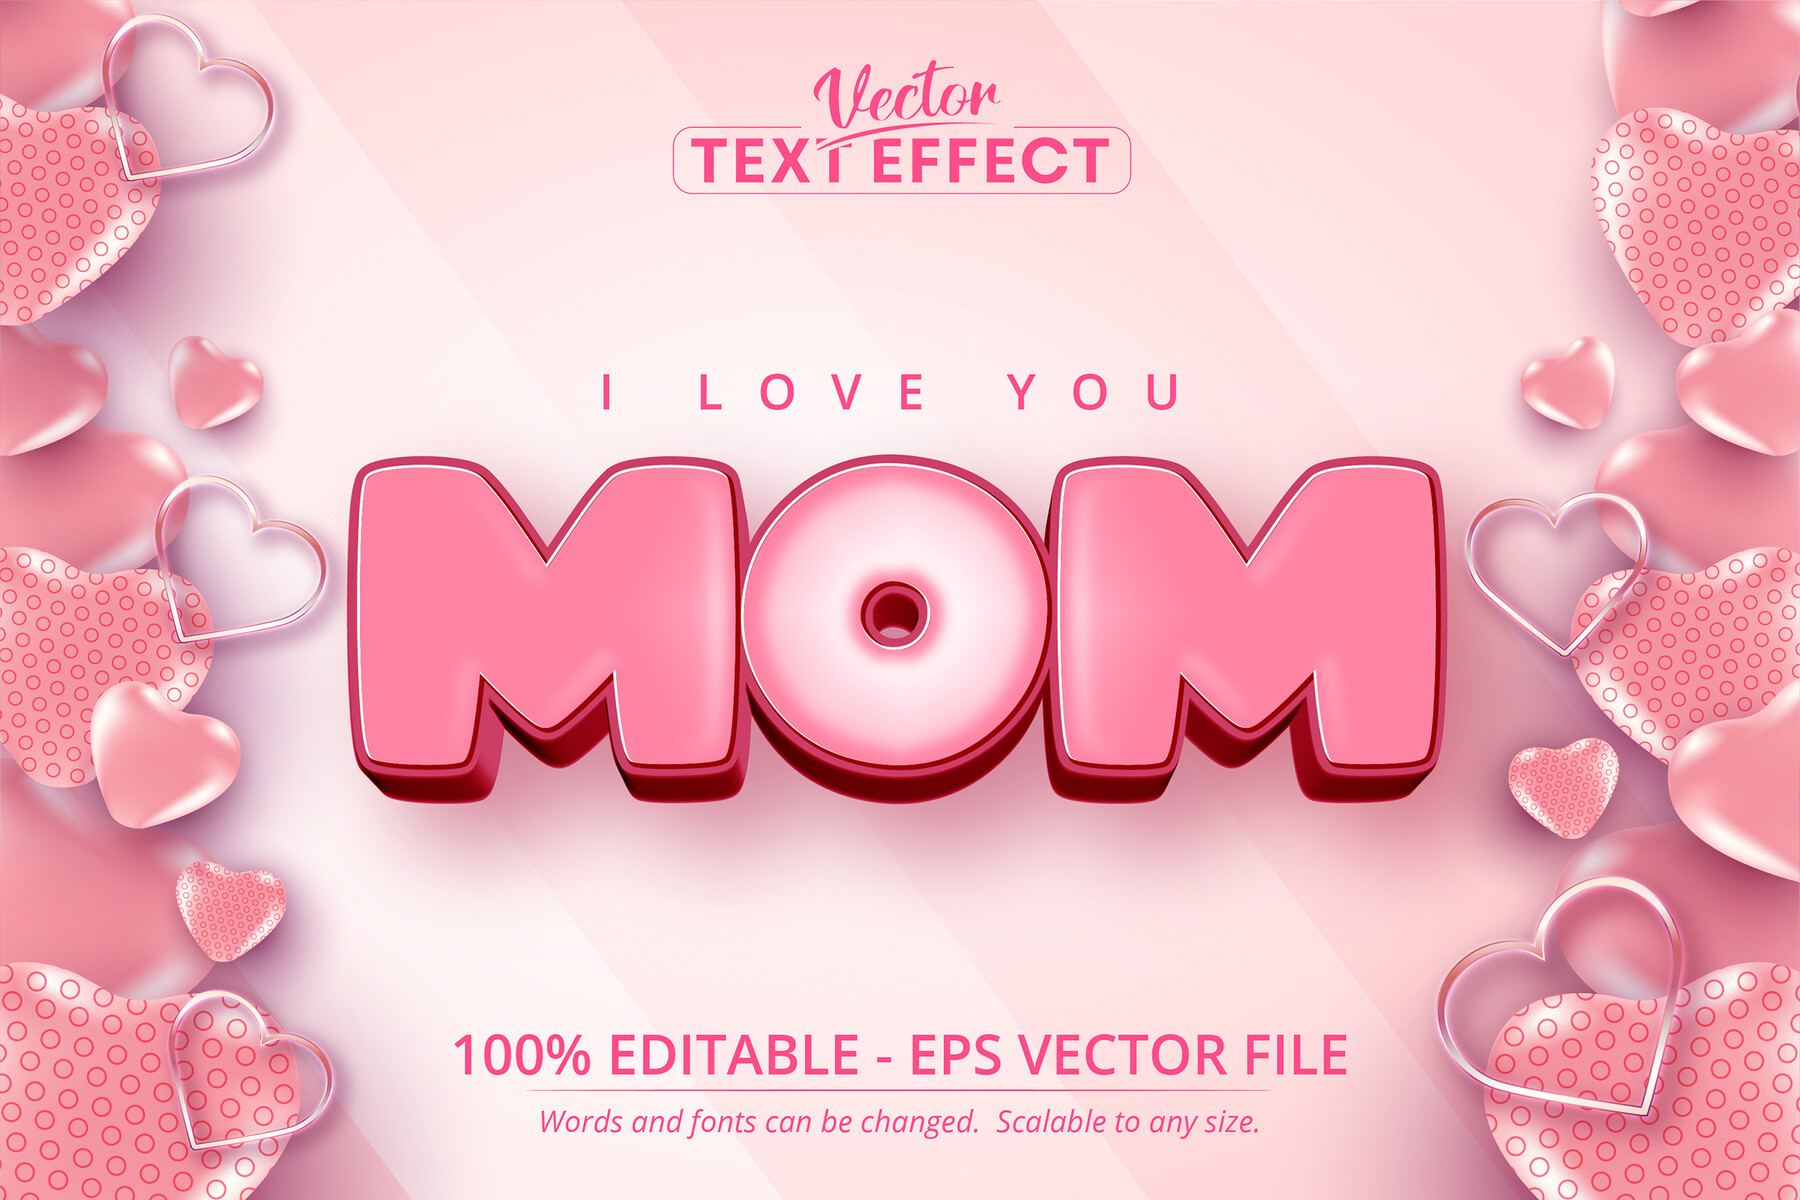 ArtStation - I love you mom text, cartoon style editable text effect on pink  color heart balloon background | Artworks